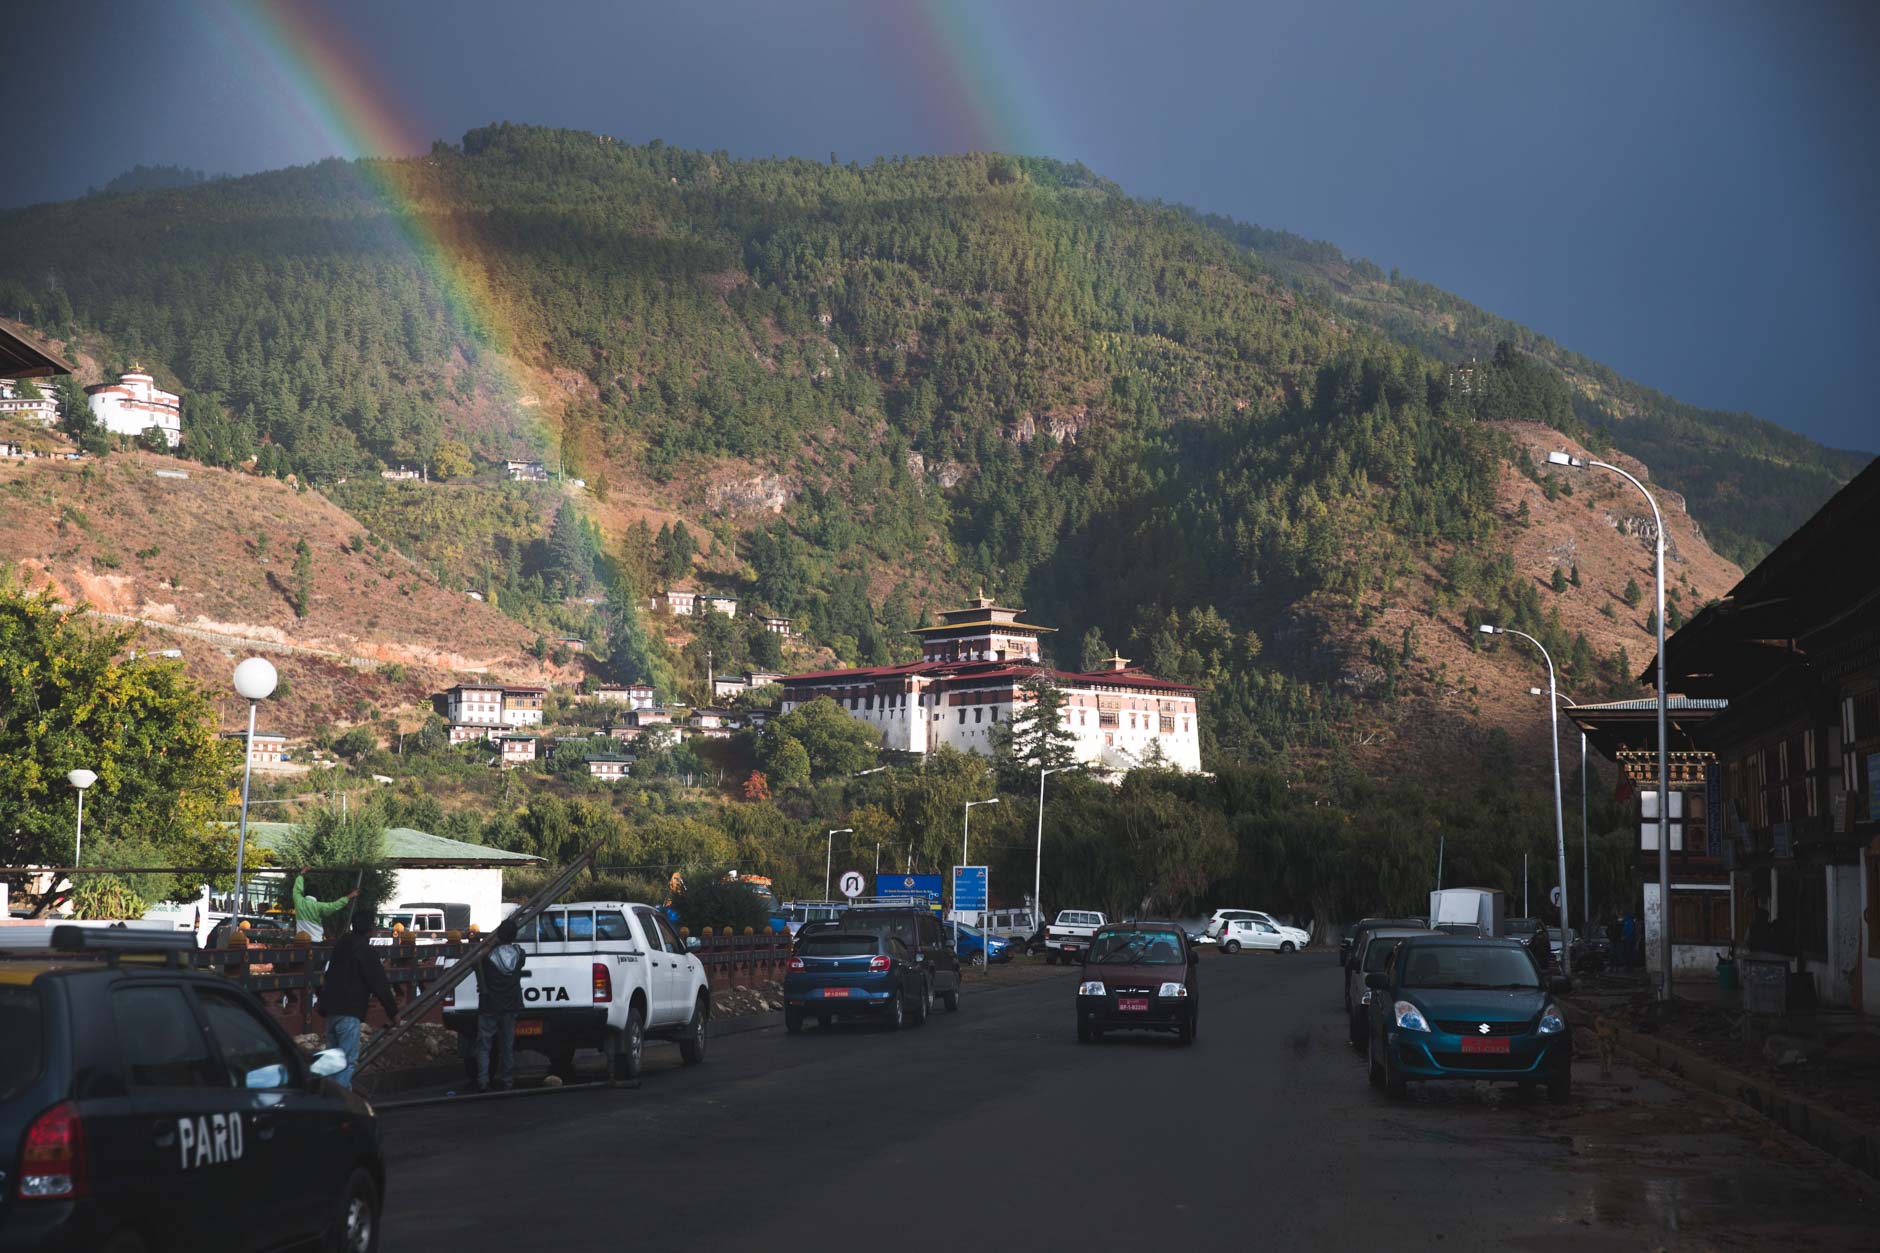 Photography of double rainbows over the temple of Ring Dzong in Paro, Bhutan